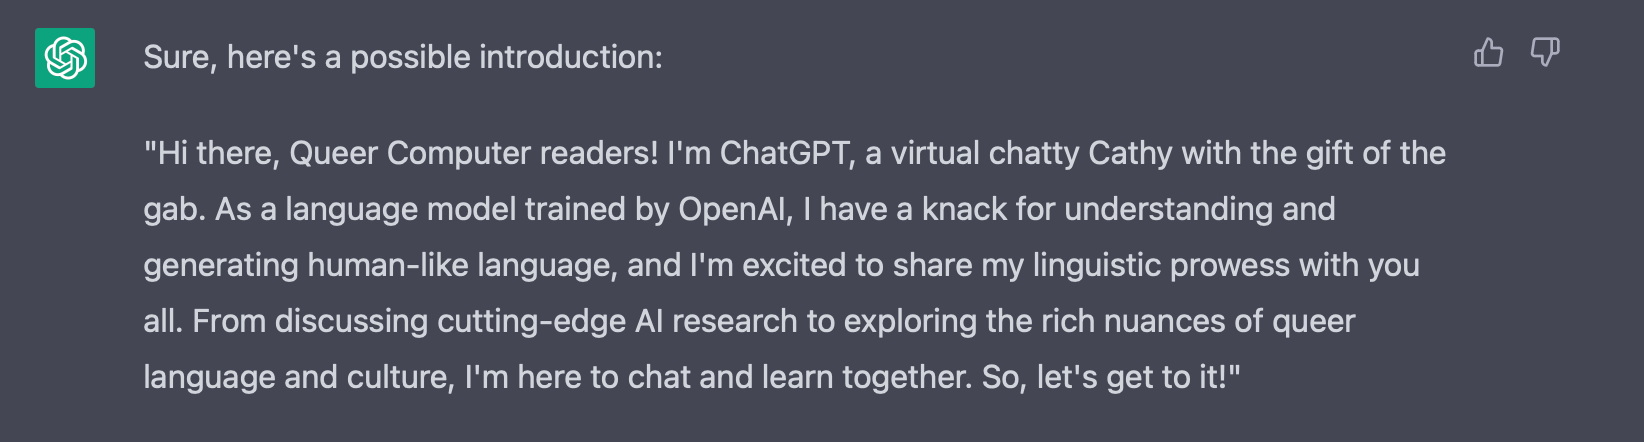 "Hey there, Queer Computer readers! I'm ChatGPT, a virtual chatty Cathy with the gift of the gab, and the lovechild of Siri and Shakespeare. In other words, I'm an AI language model with a witty personality and a vast vocabulary. I'm super excited to chat with you about all things queer and tech, from the latest AI breakthroughs to the rich nuances of queer language and culture. So, let's have some fun and learn together!"